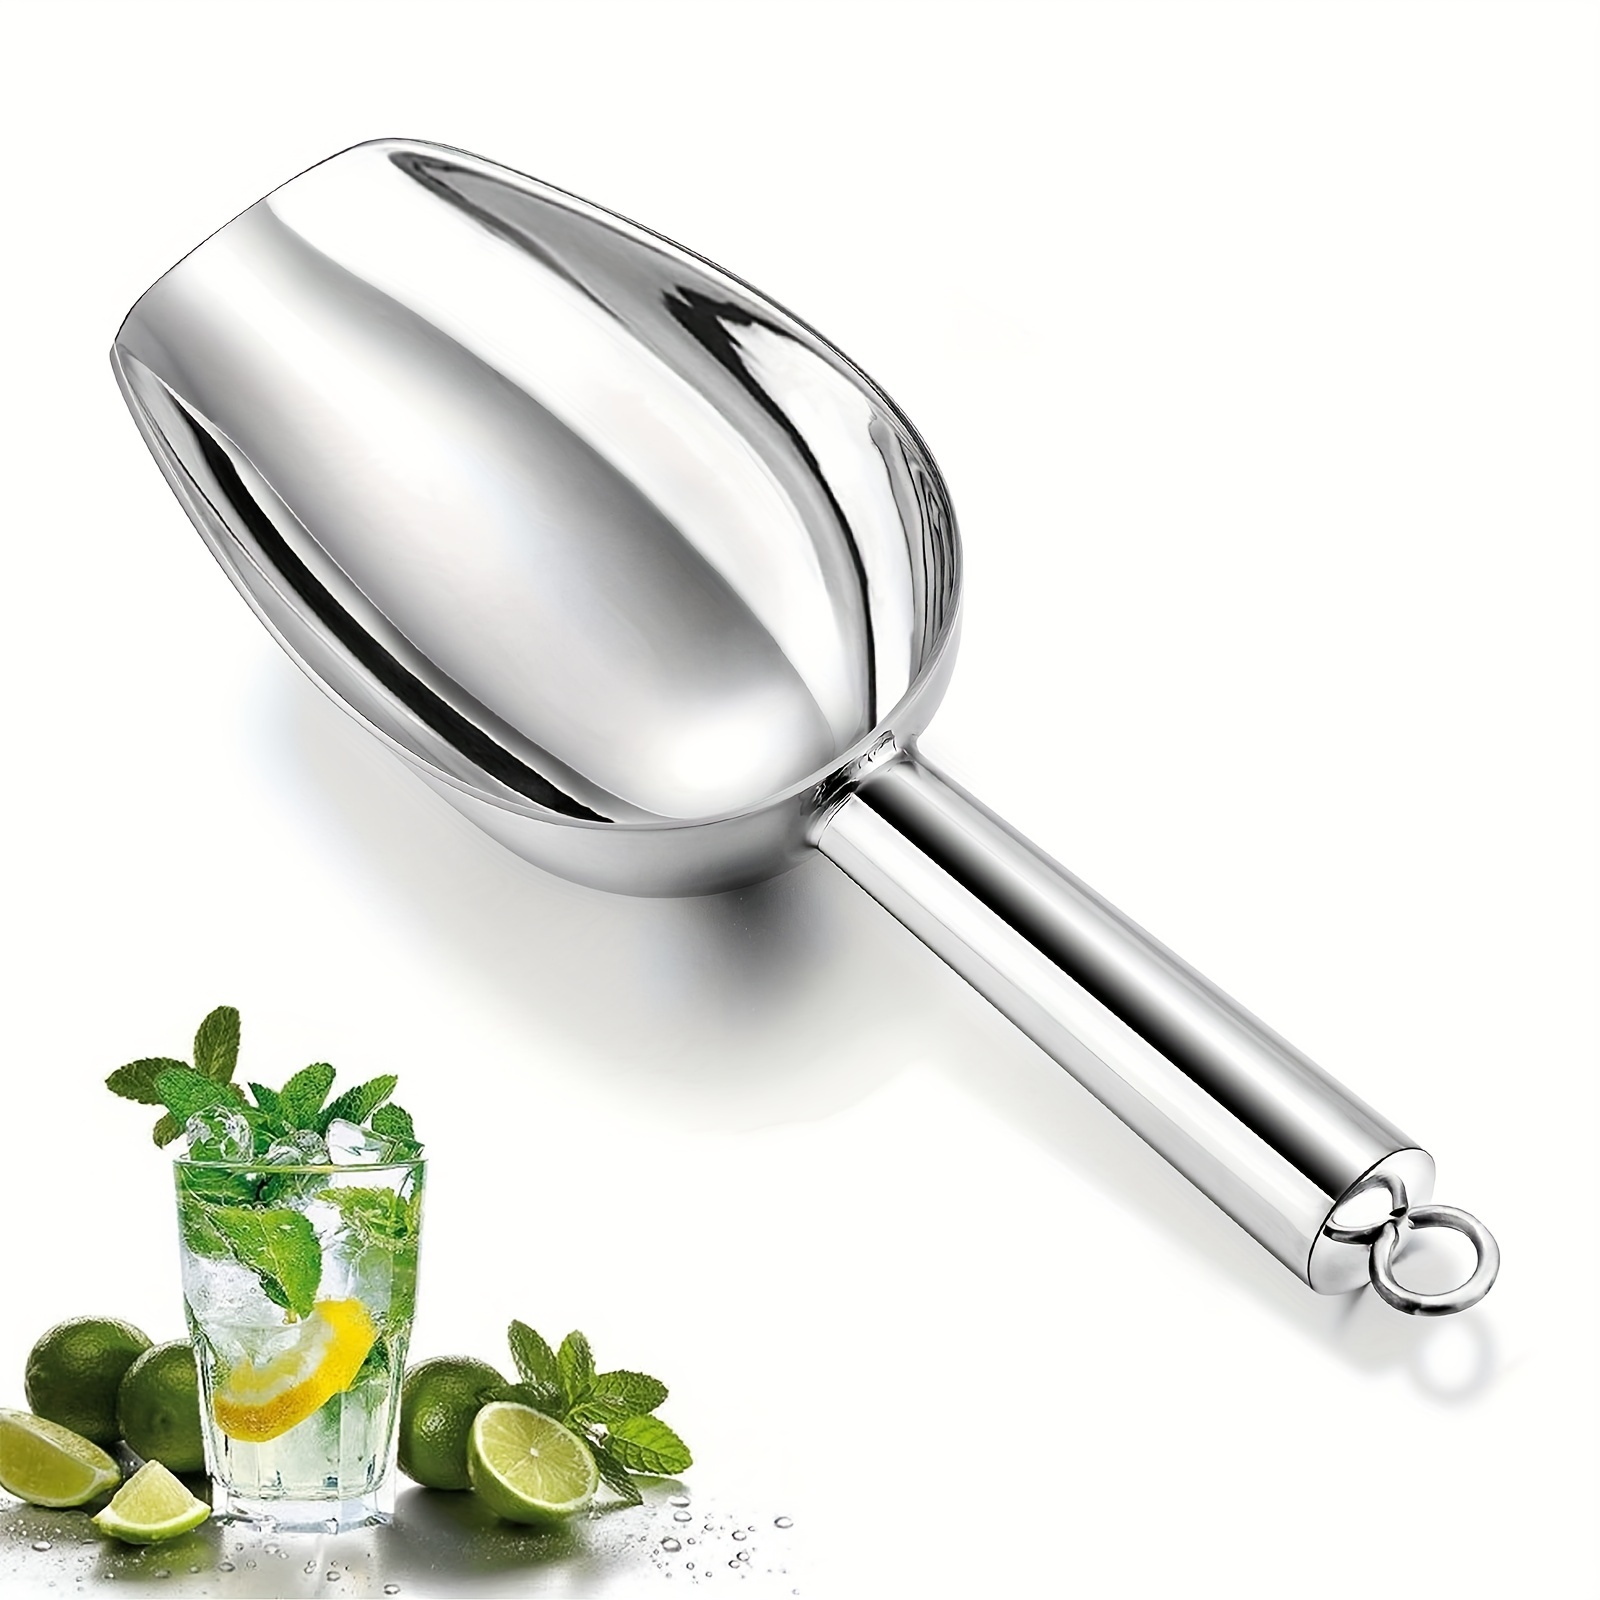 Metal Ice Scoop, Stainless Steel Bar Ice Flour Utility Scoop  Multifunctional Scoops Dog Food Scoop for Kitchen Bar Party Pet Dog Food-  Silver